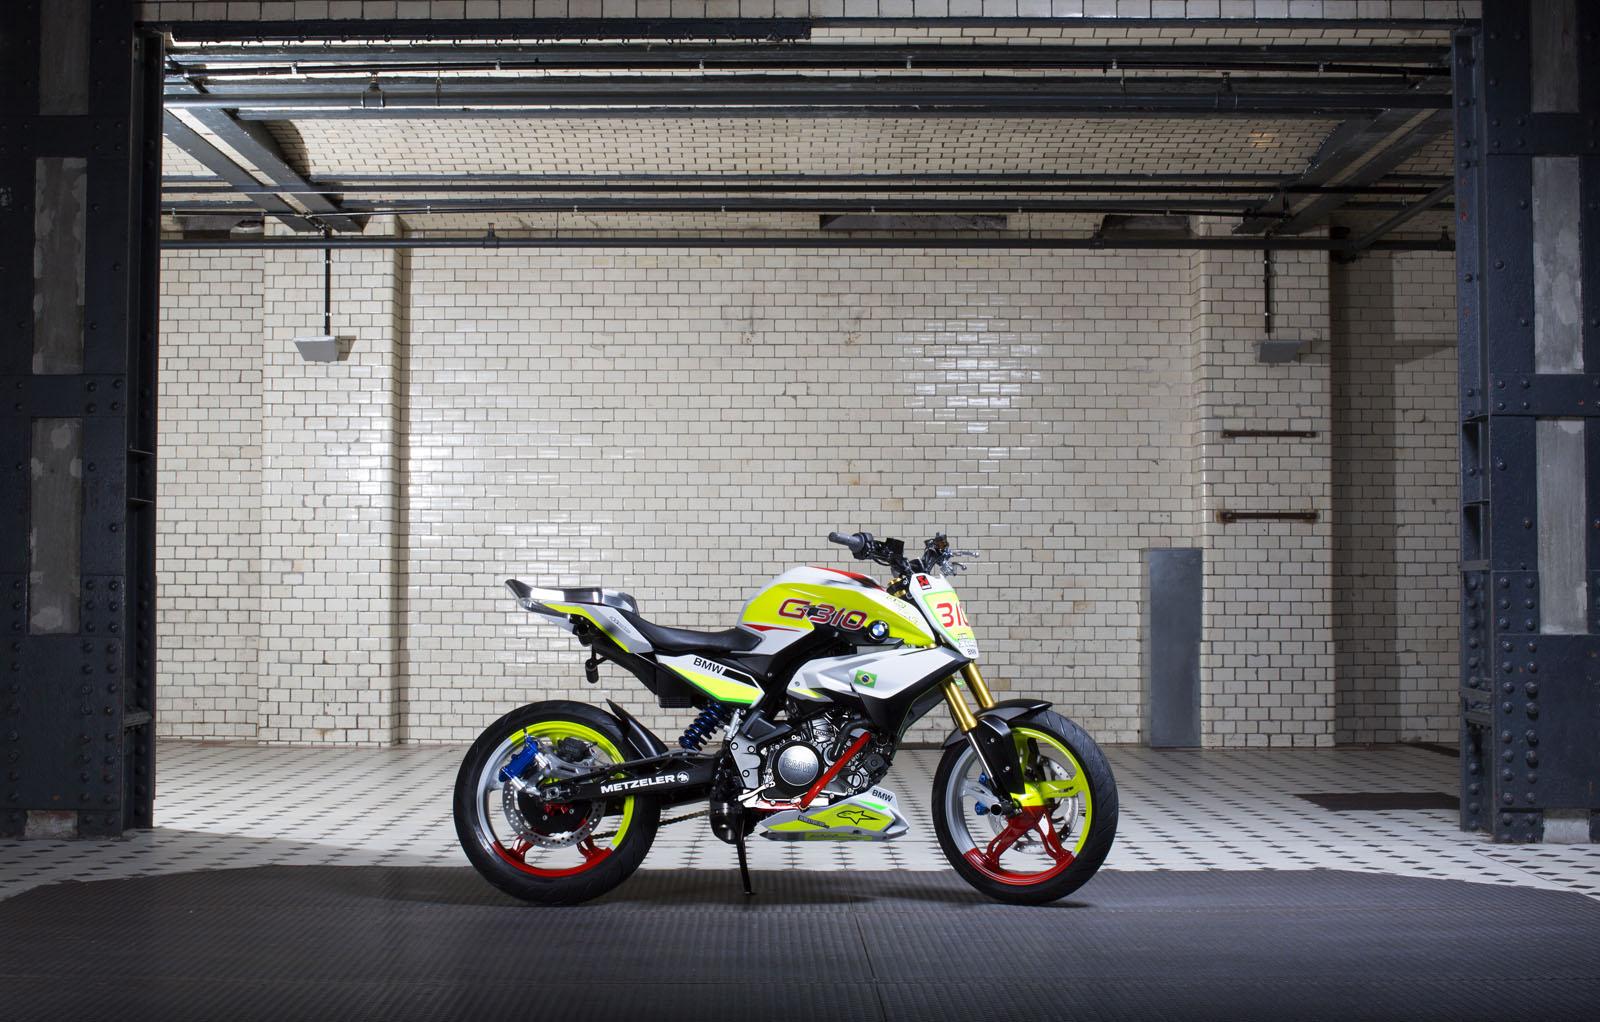 One-Cylinder BMW Concept Stunt G 310 Unveiled at the Salao Duas Rodas Motorcycle Show, Sao Paulo